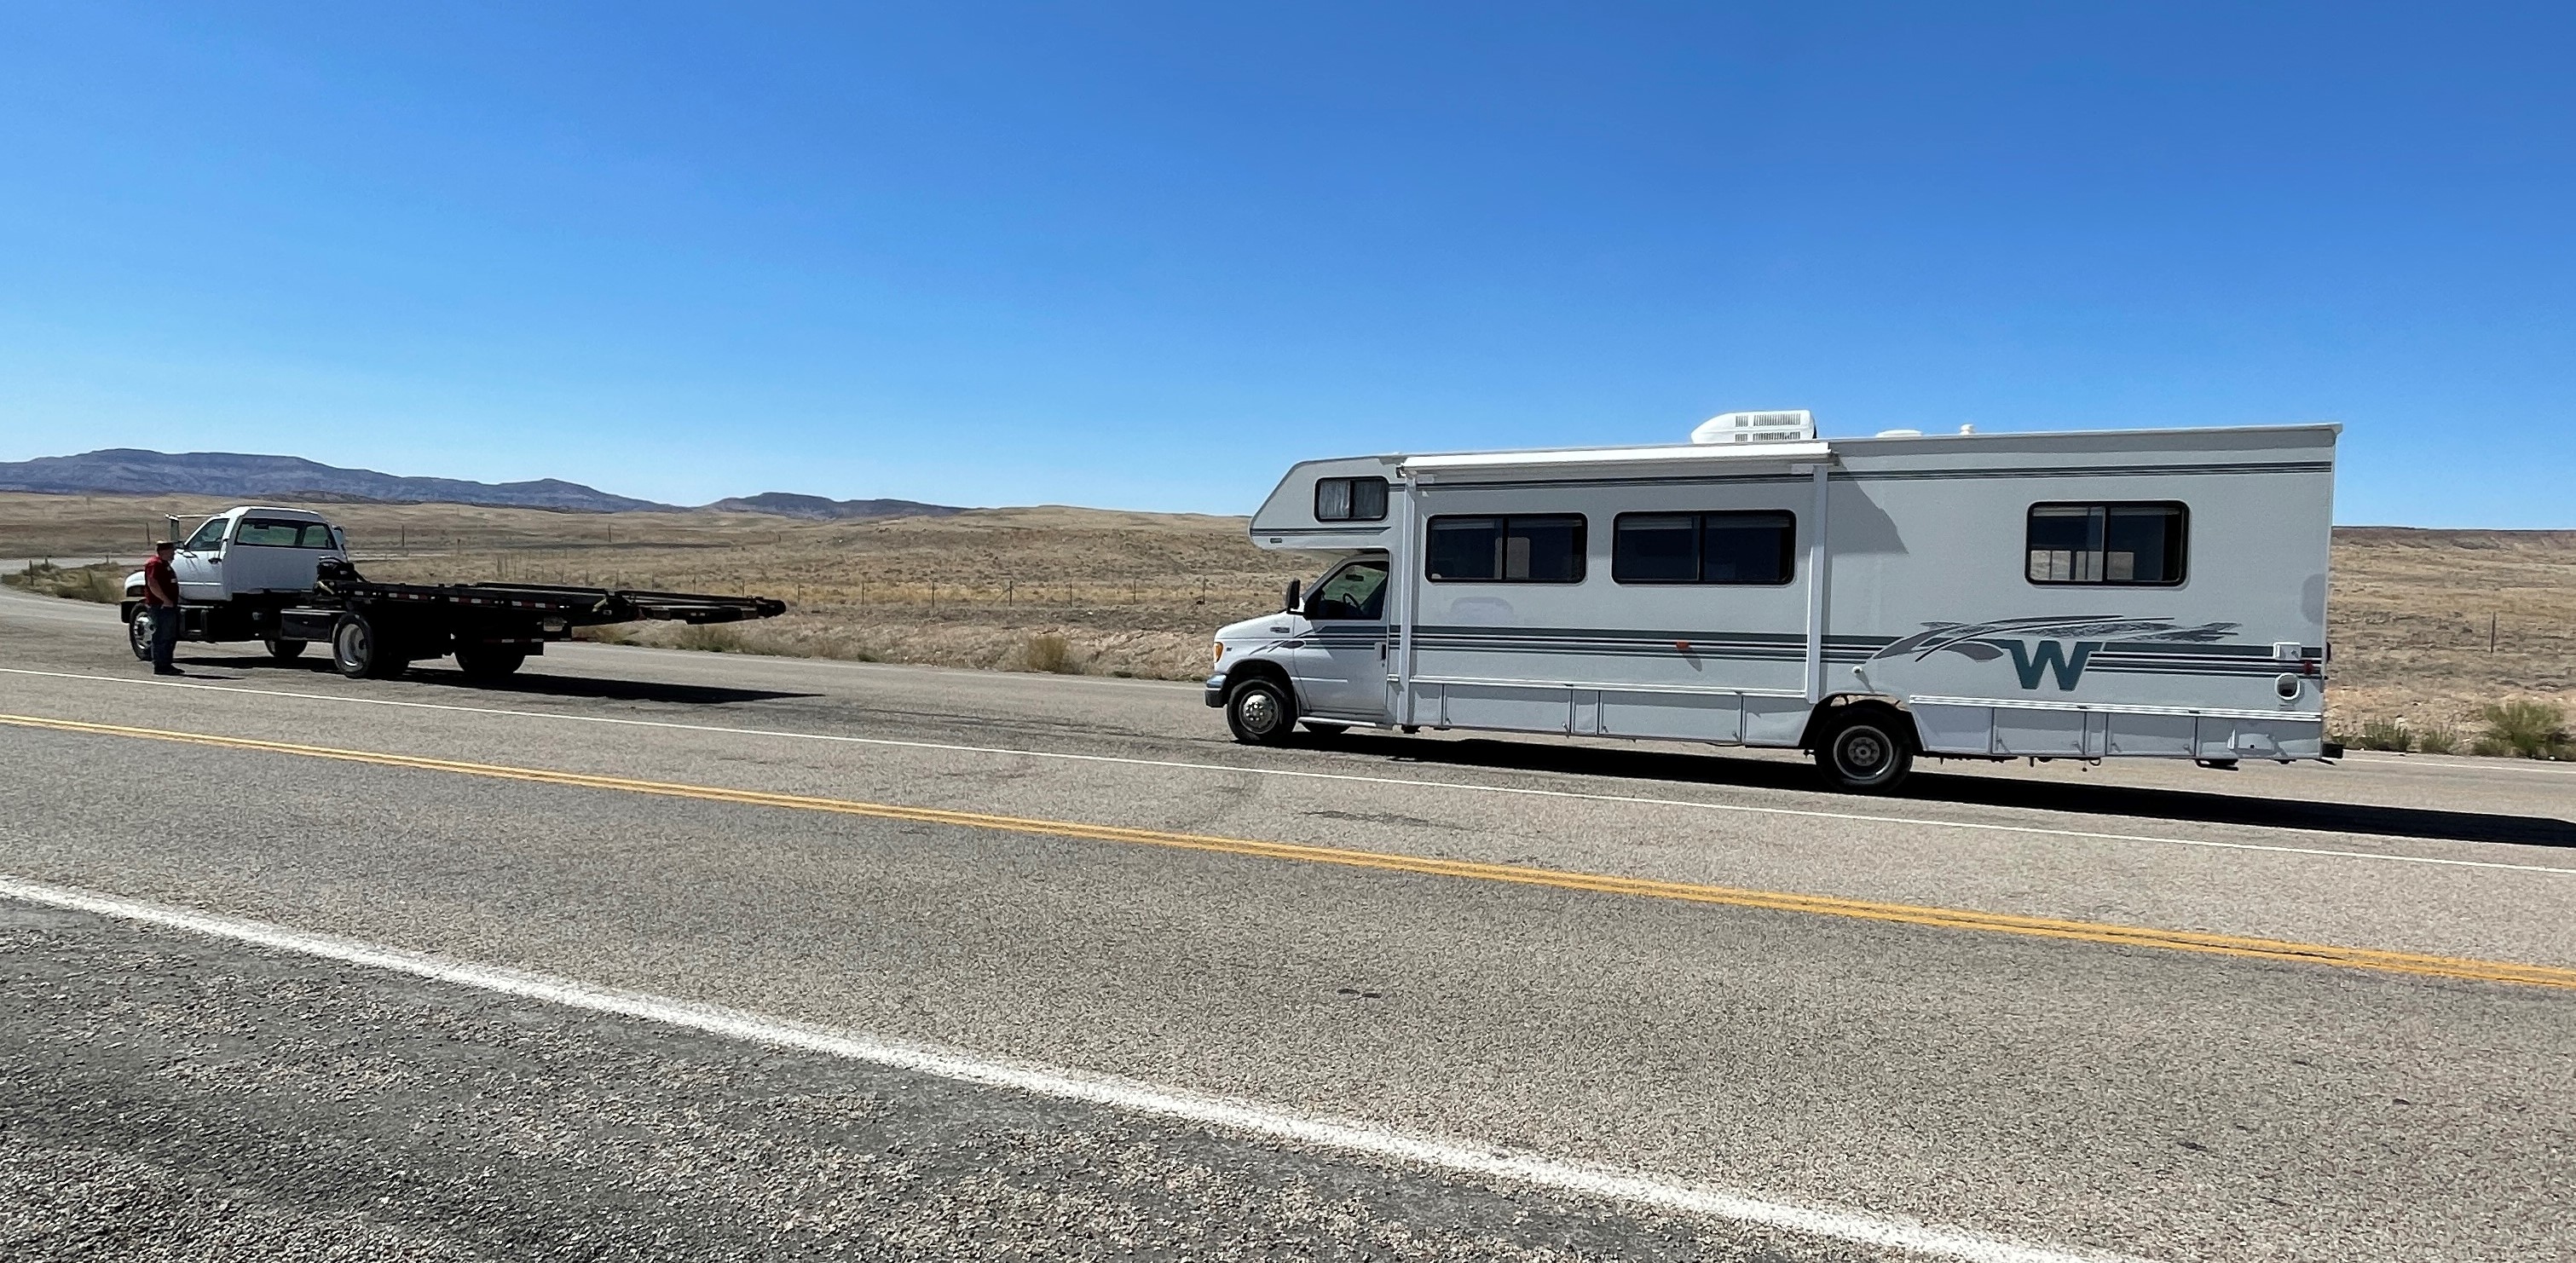 The truck backs up to an RV. Will it tow?